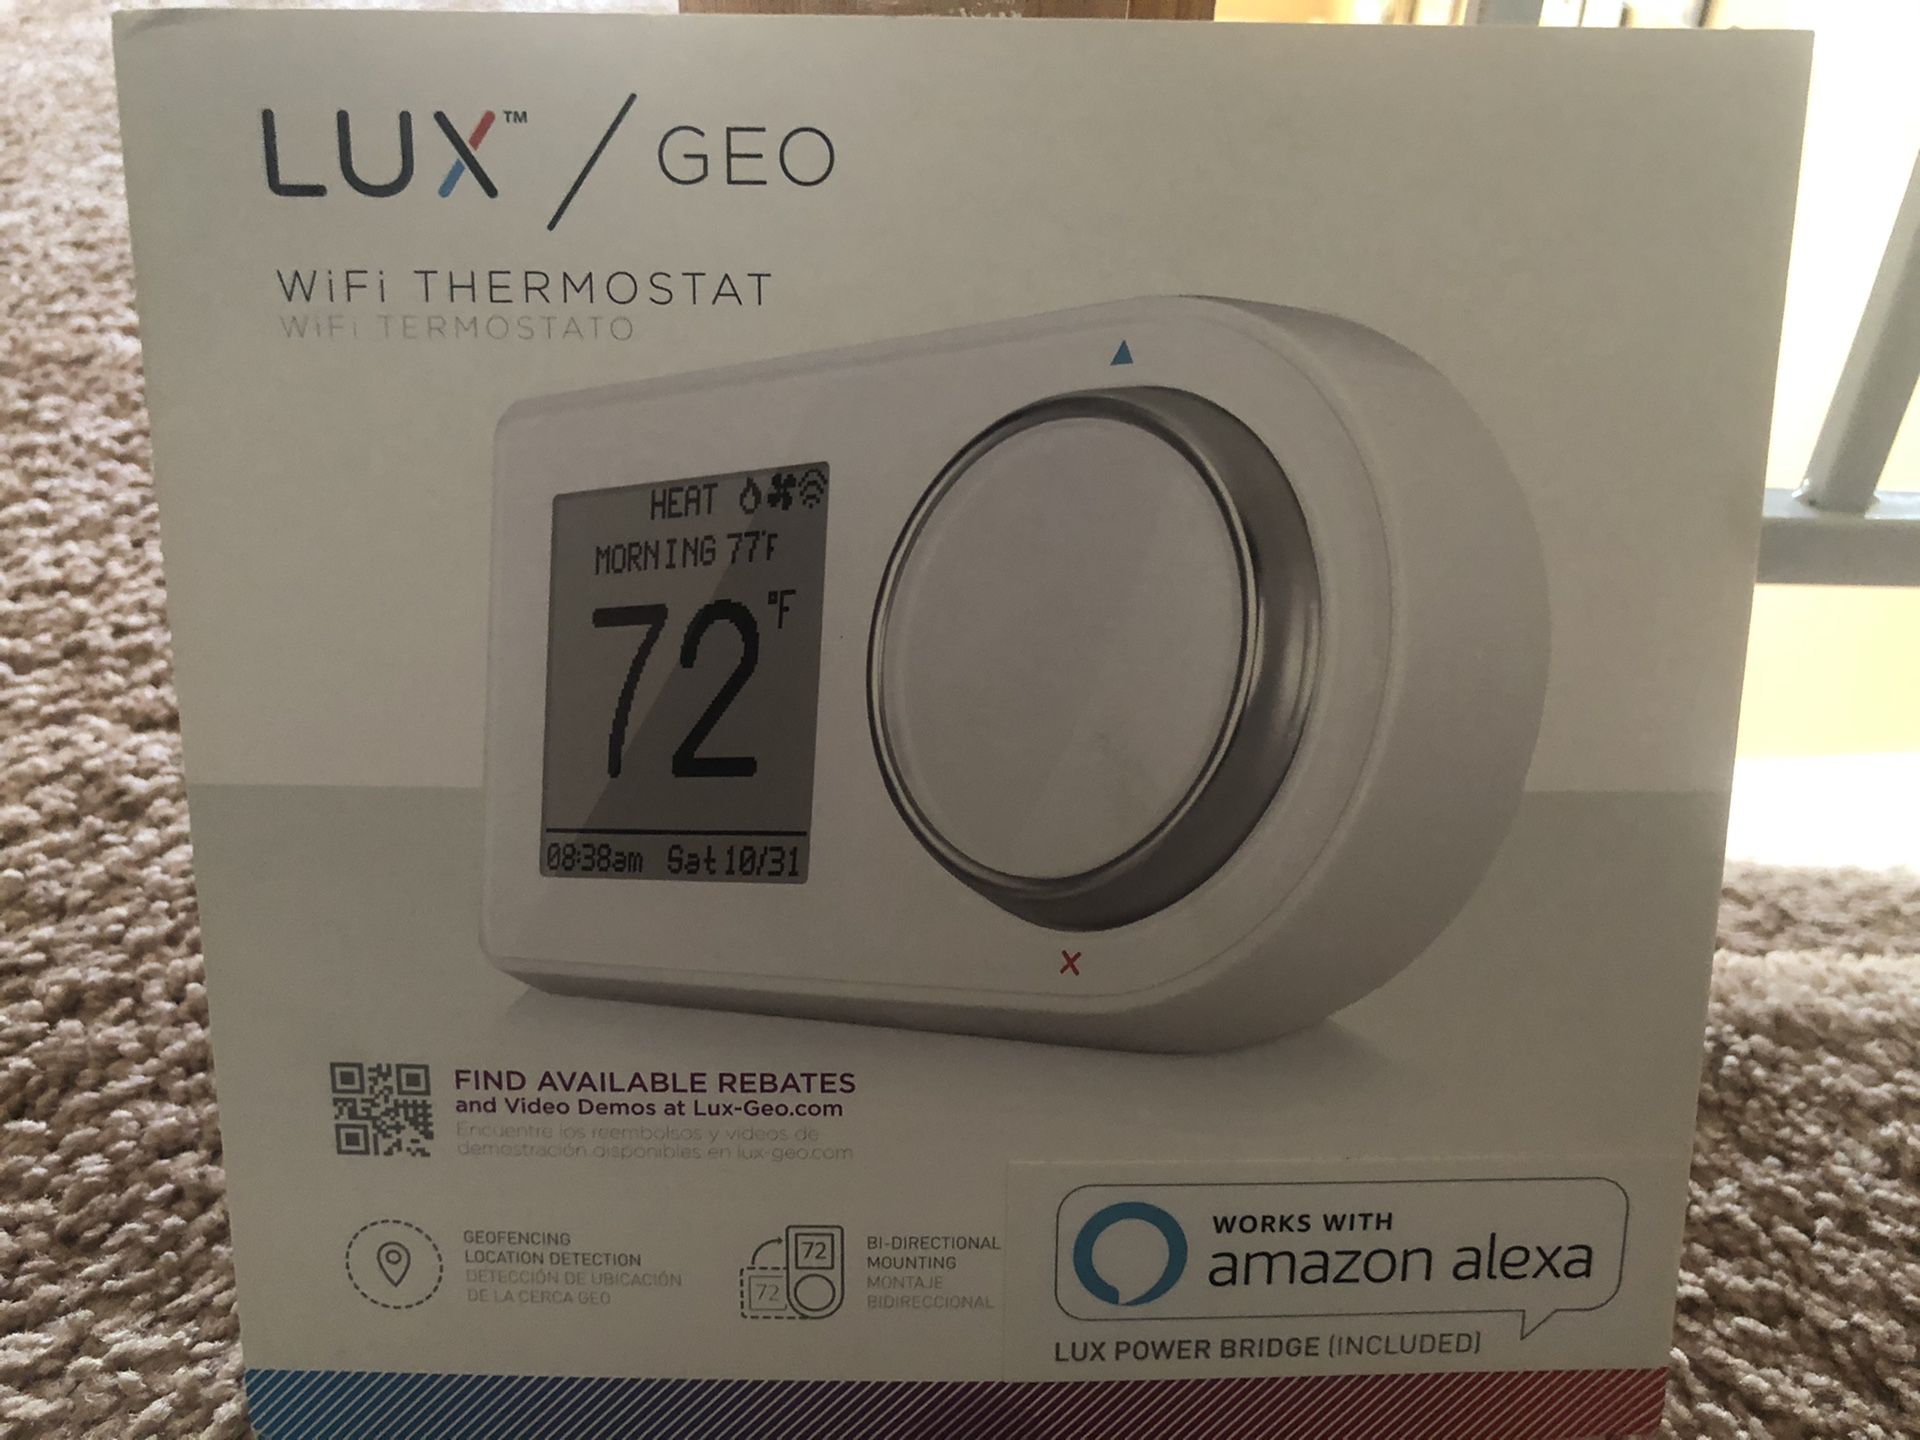 2 each LUX/GEO WiFi Thermostats